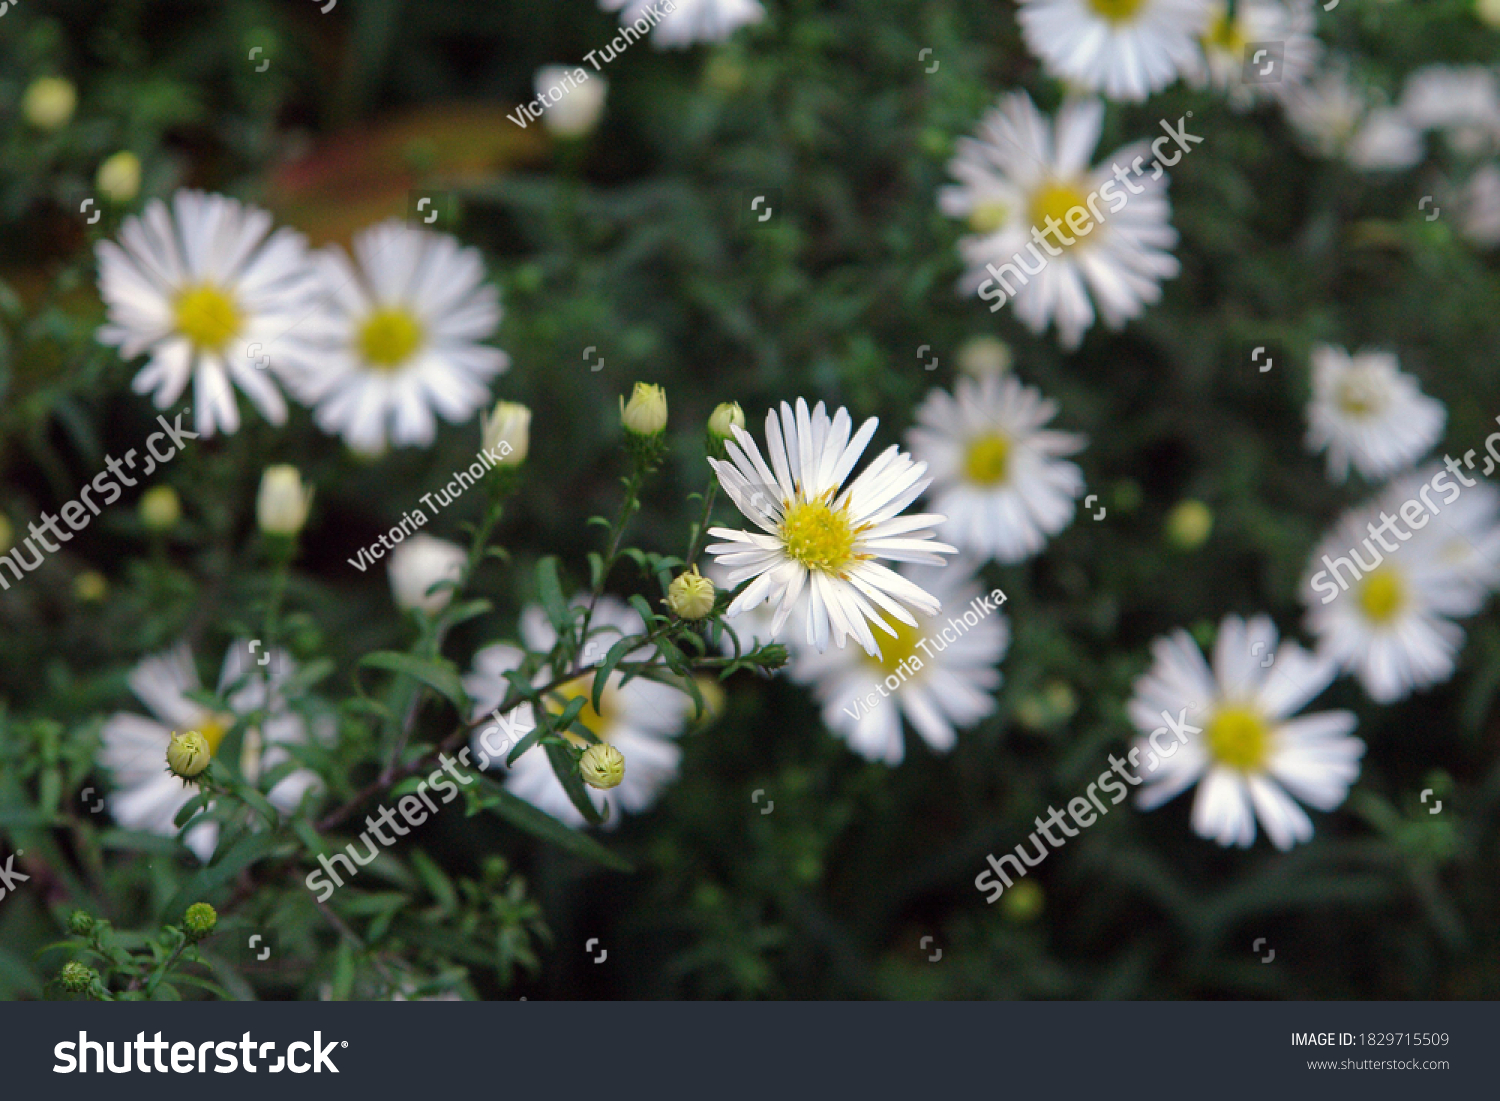 Close up of a multitude of small white flowers of Aster amellus, the European Michaelmas-daisy. Poland, Europe                 #1829715509